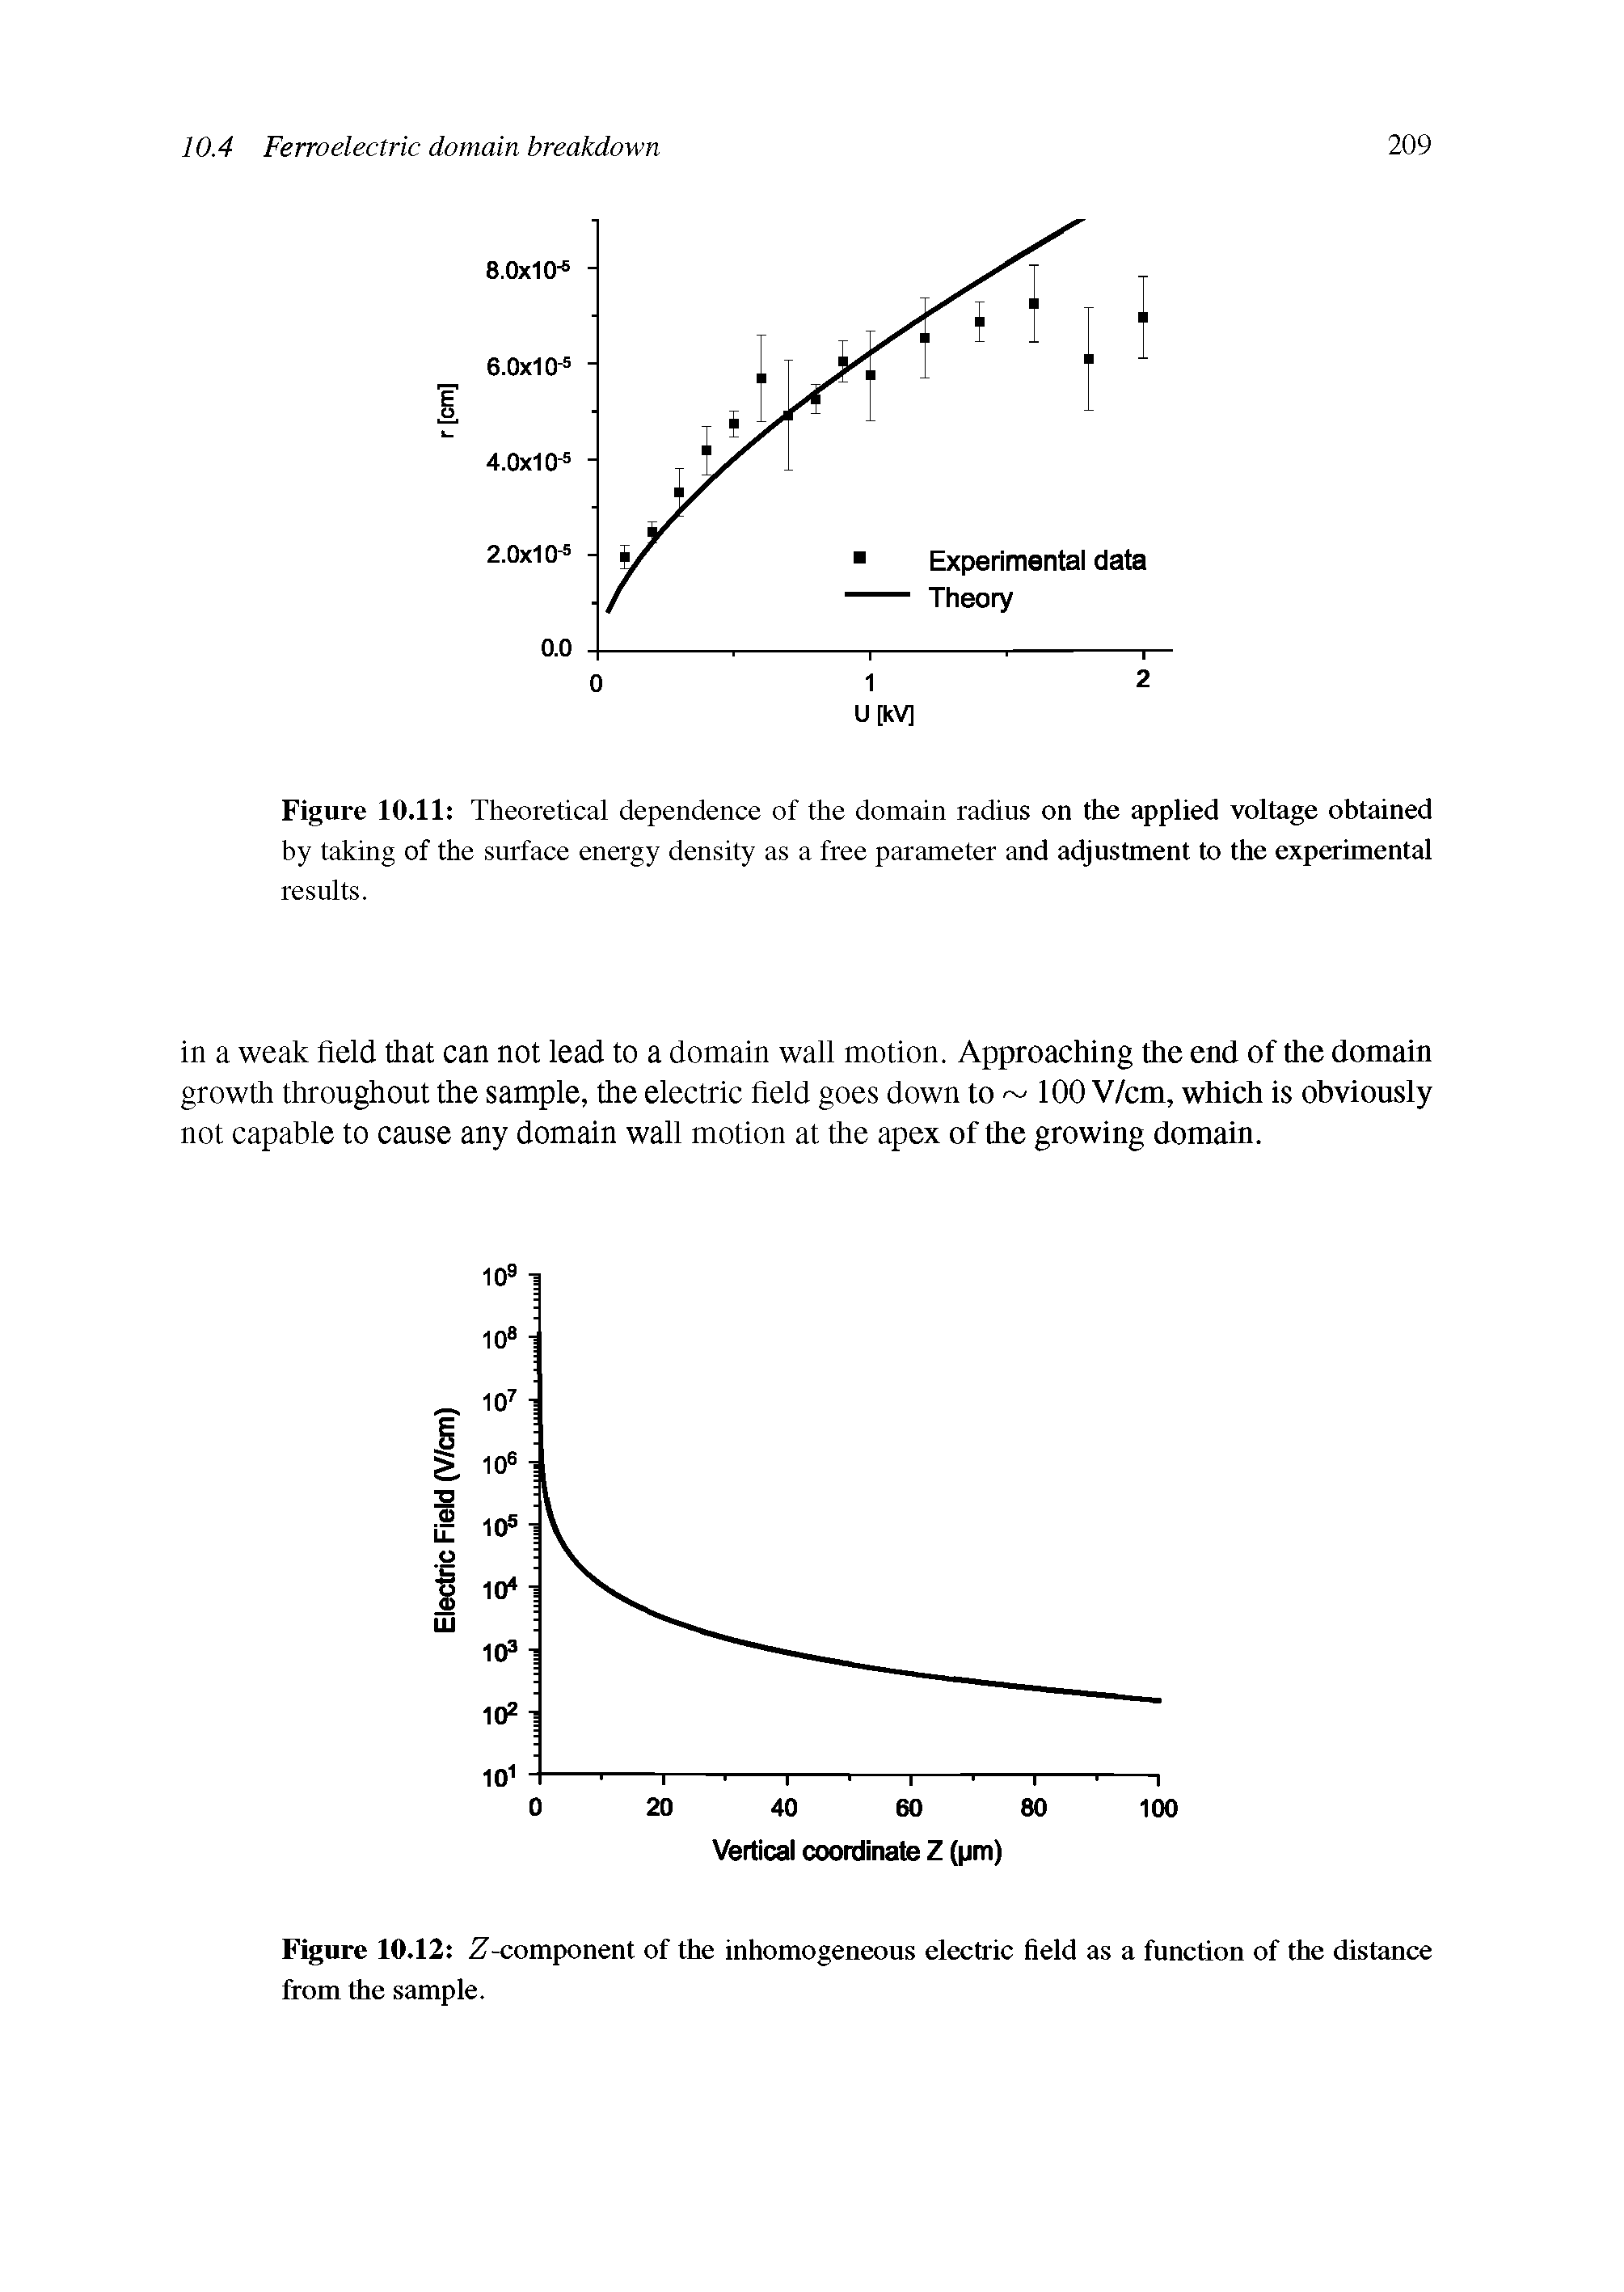 Figure 10.11 Theoretical dependence of the domain radius on the applied voltage obtained by taking of the surface energy density as a free parameter and adjustment to the experimental results.